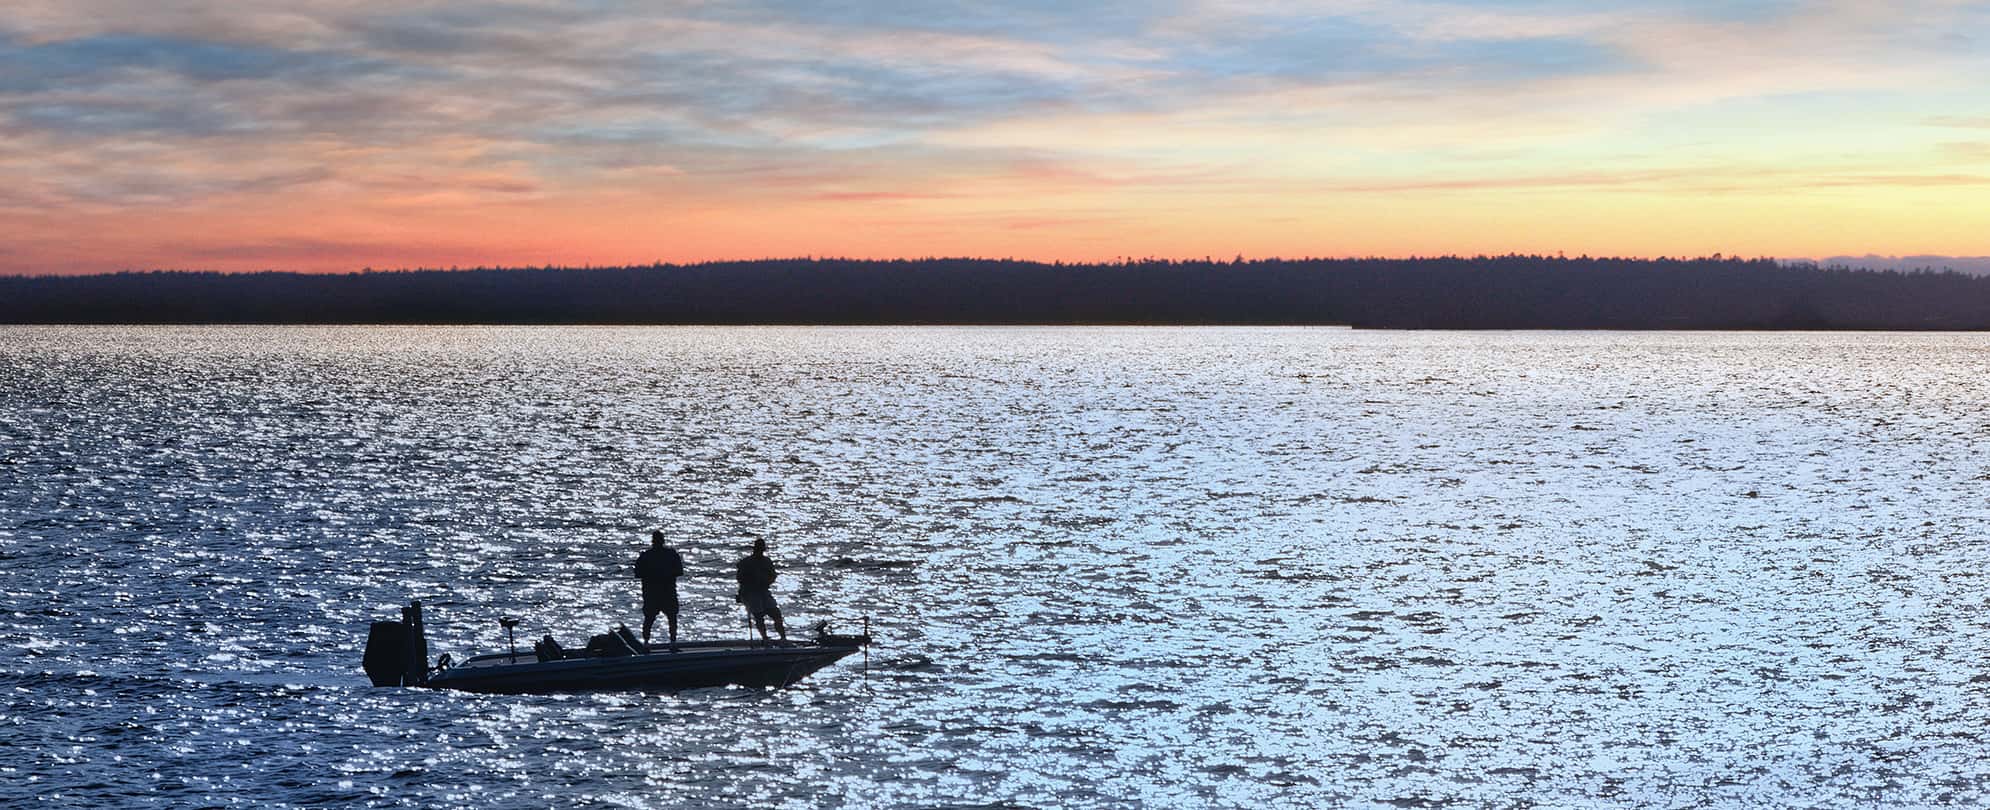 Two people stand on a small boat in the middle of a lake looking out over the sunset in Grand Lake, Oklahoma